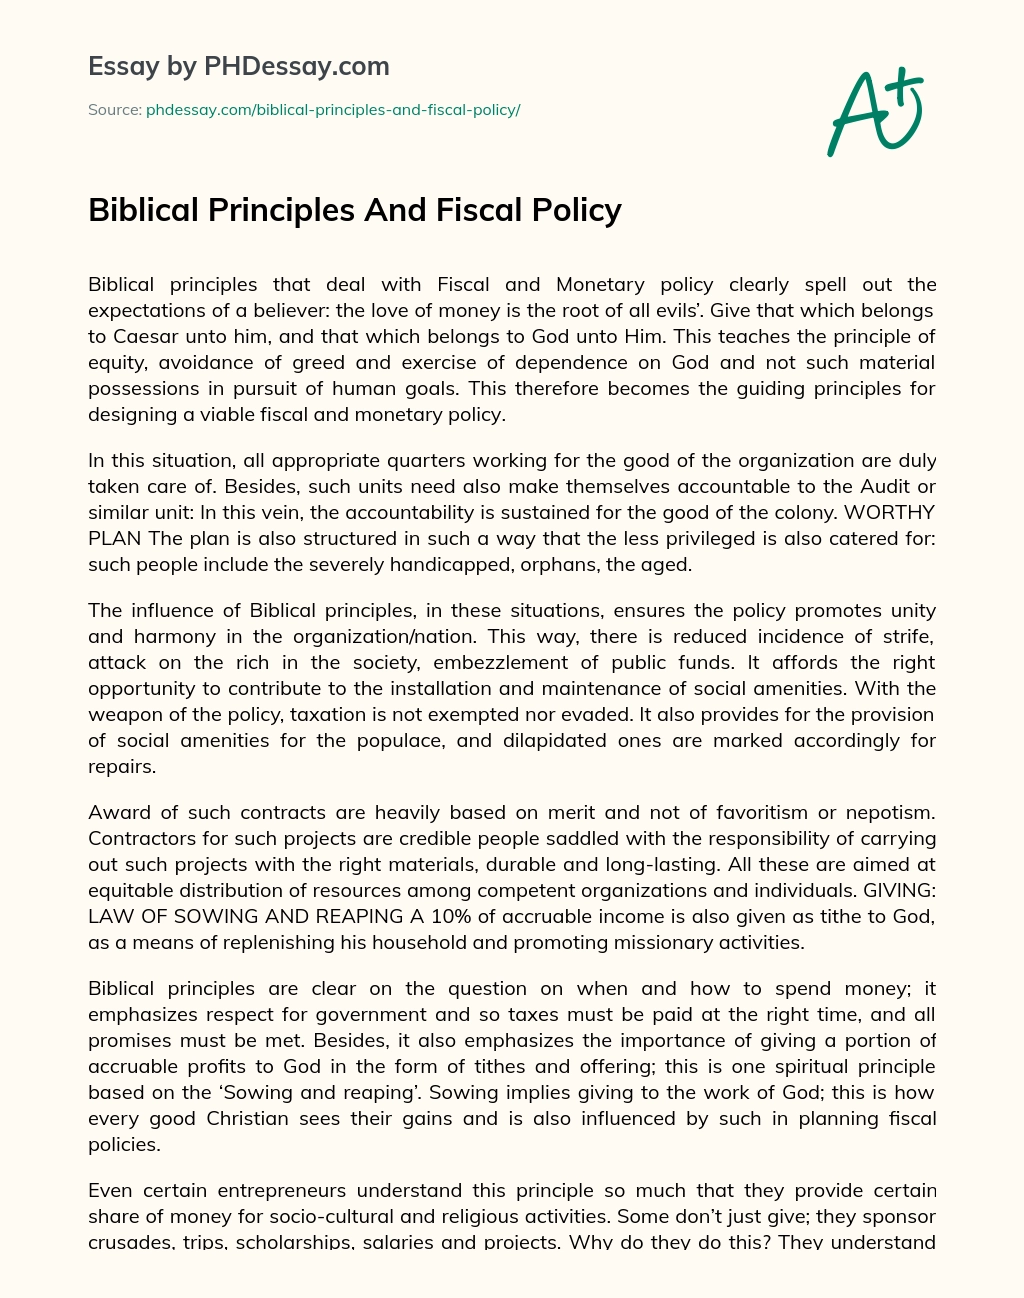 Biblical Principles And Fiscal Policy essay